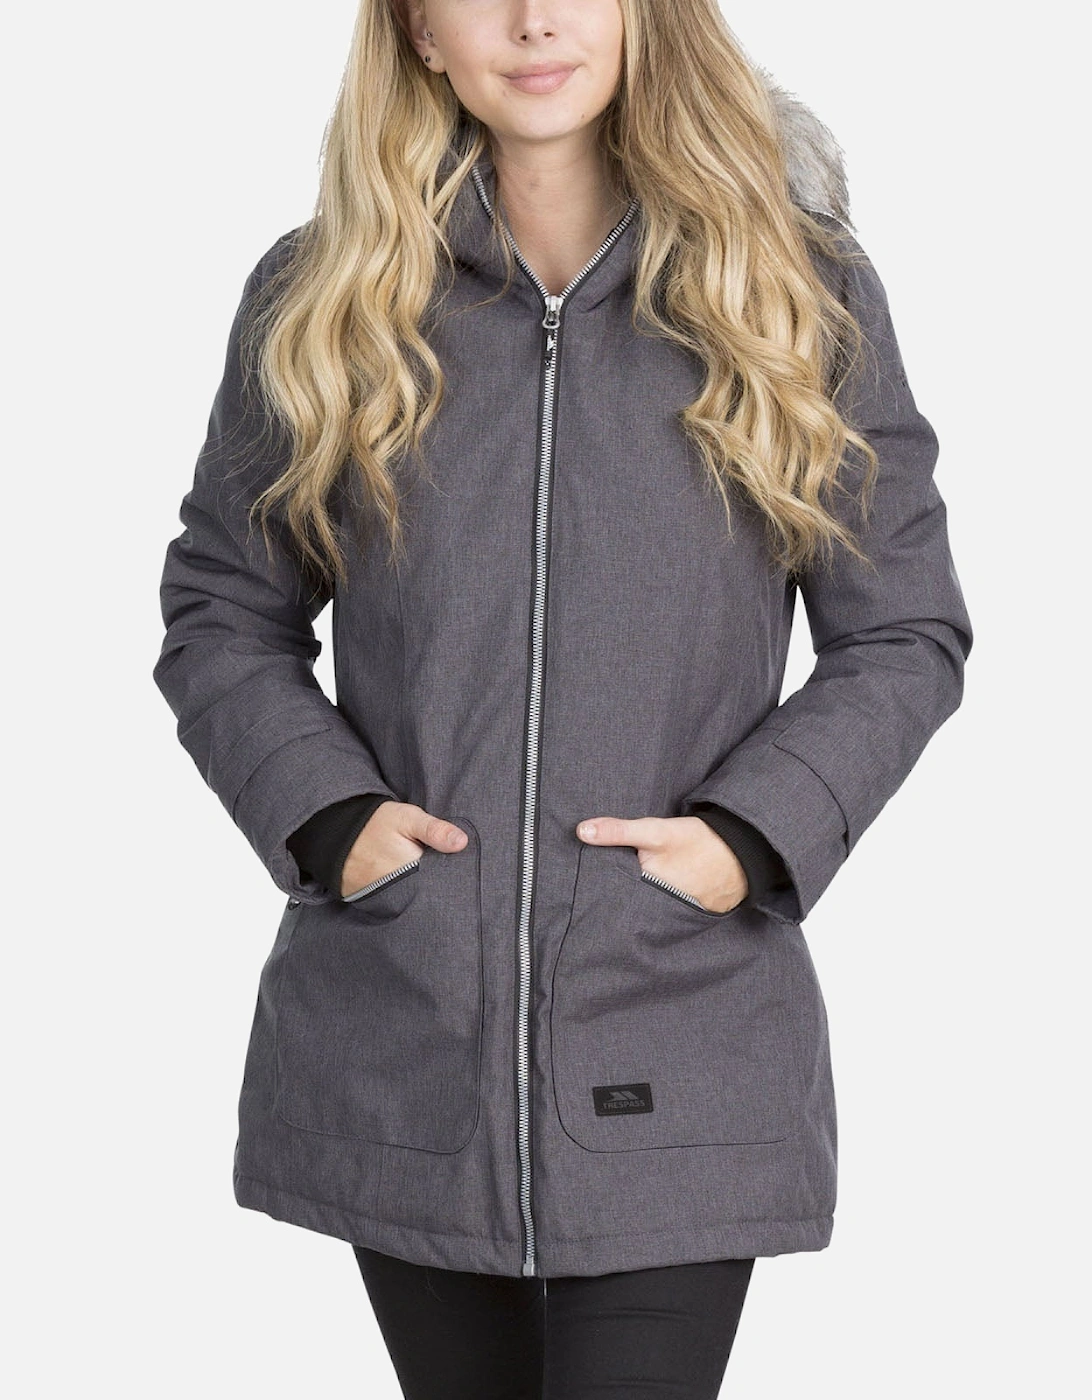 Womens Day By Day Waterproof Parka Jacket